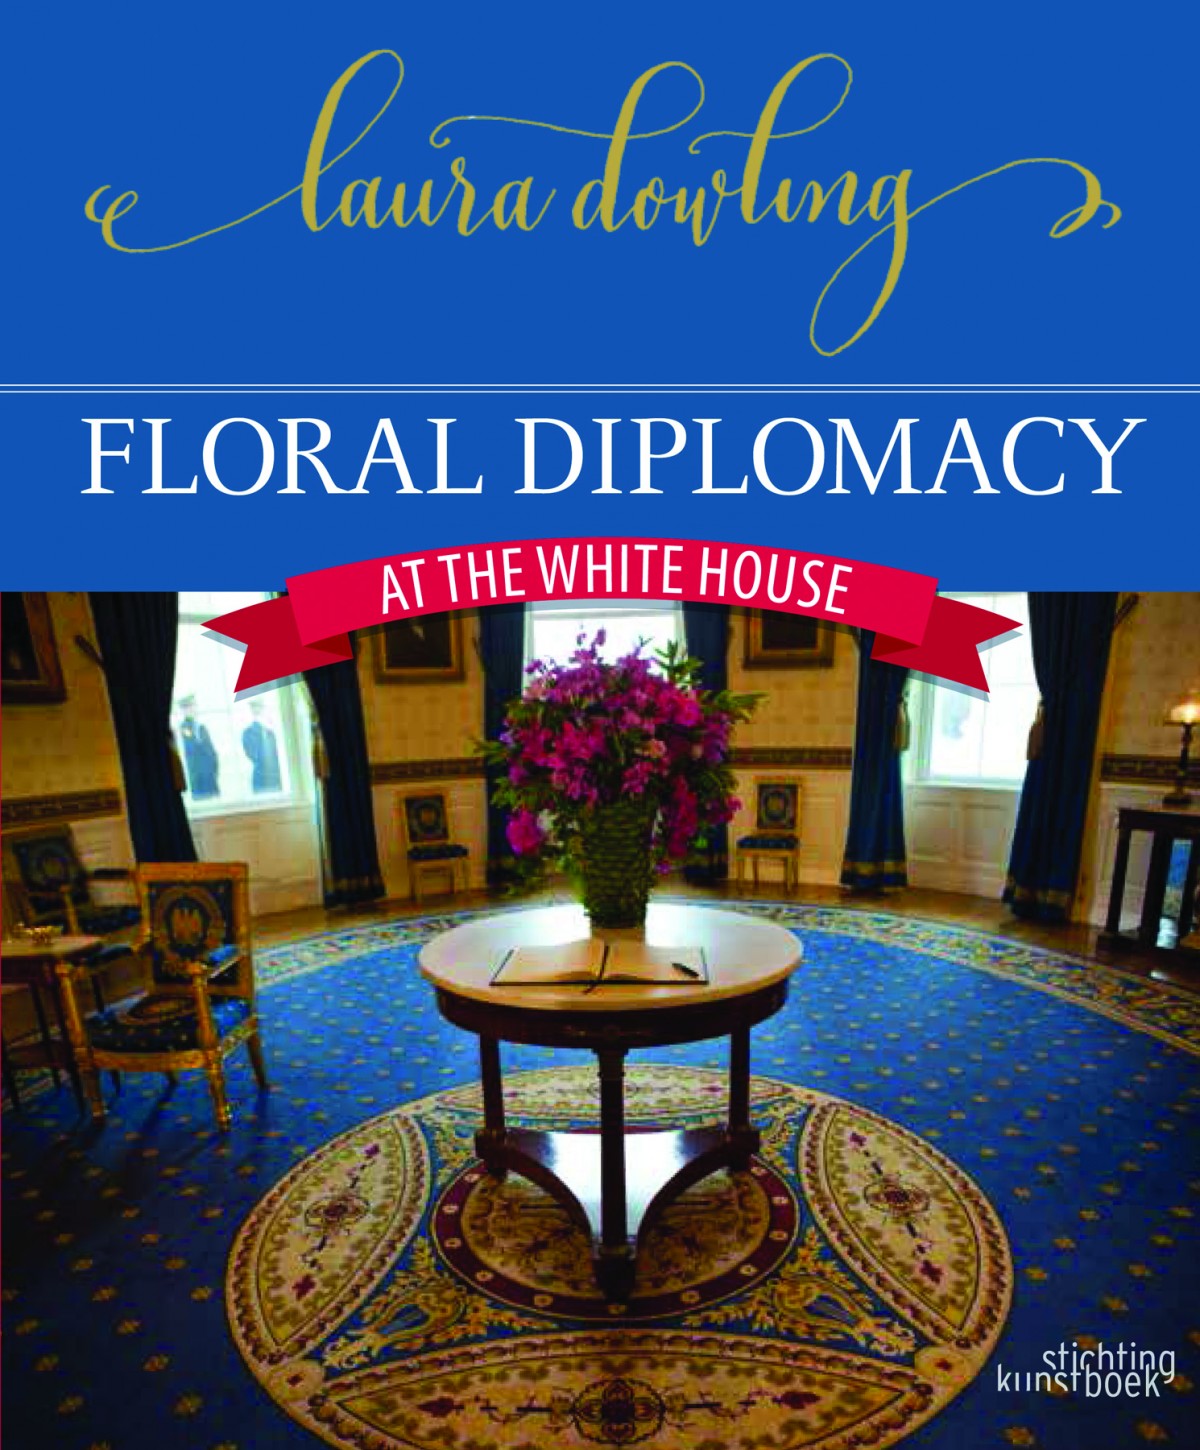 Blue cover of FLORAL DIPLOMACY by Laura Dowling.